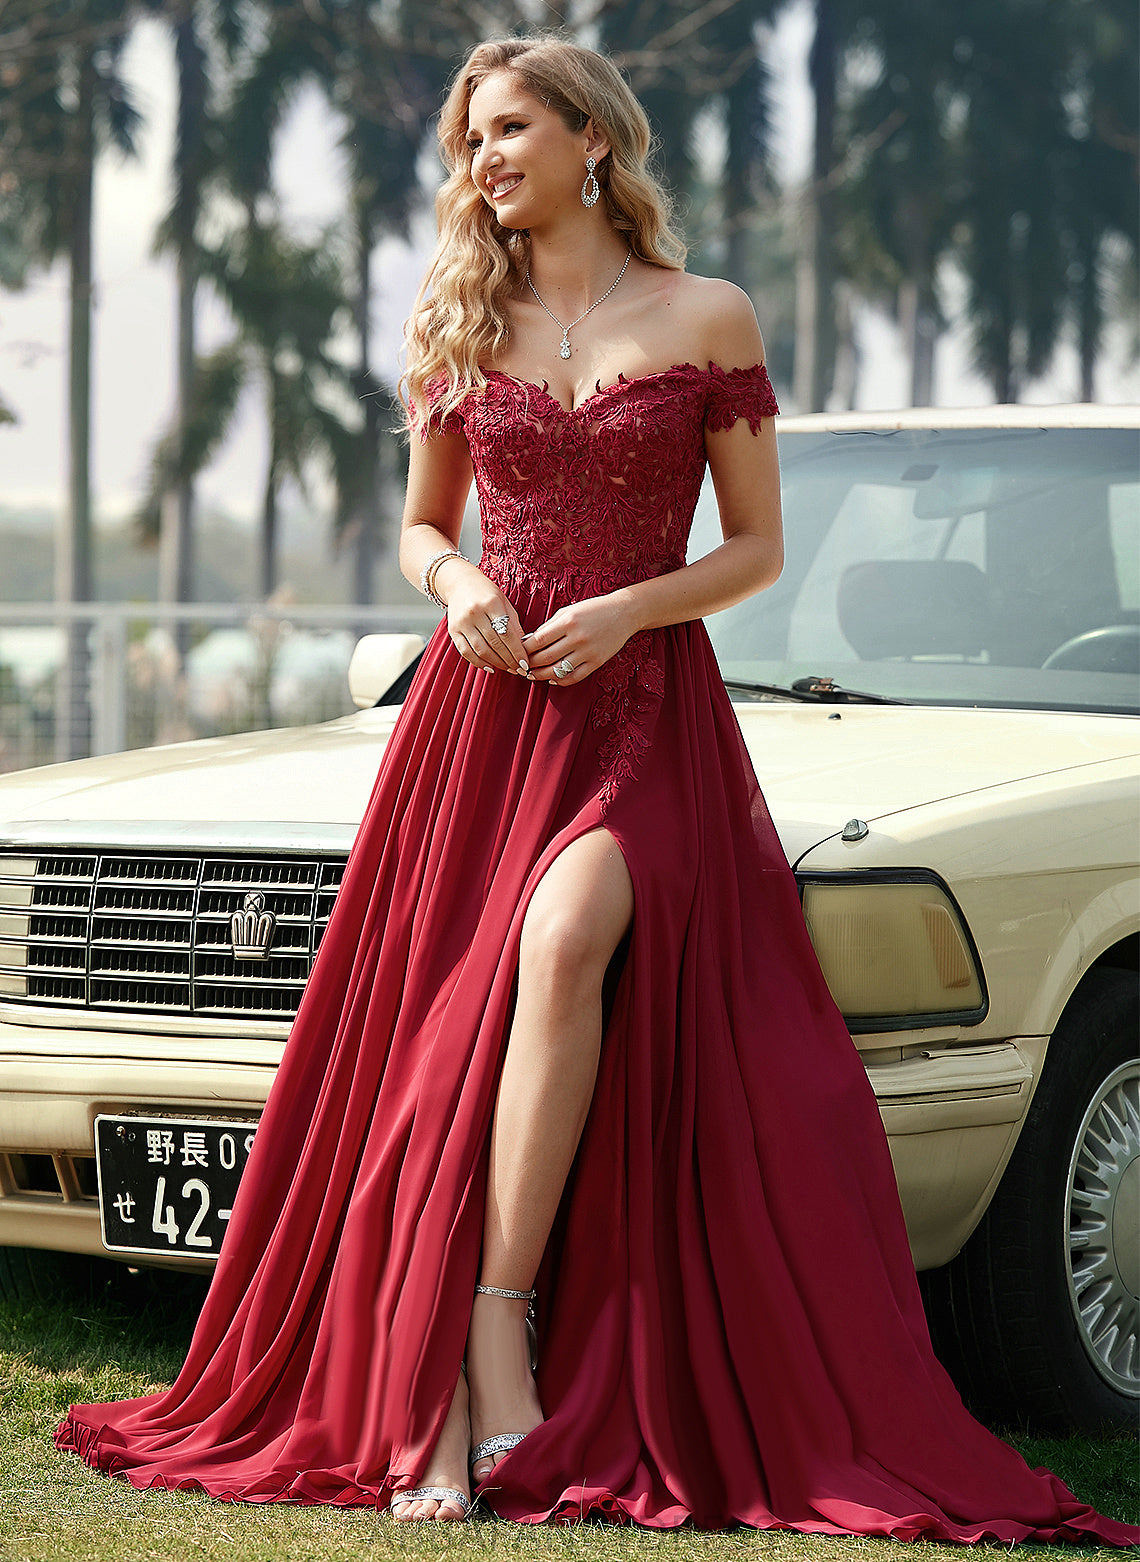 Chiffon Off-the-Shoulder With Prom Dresses A-Line Ali Lace Sweep Sequins Train